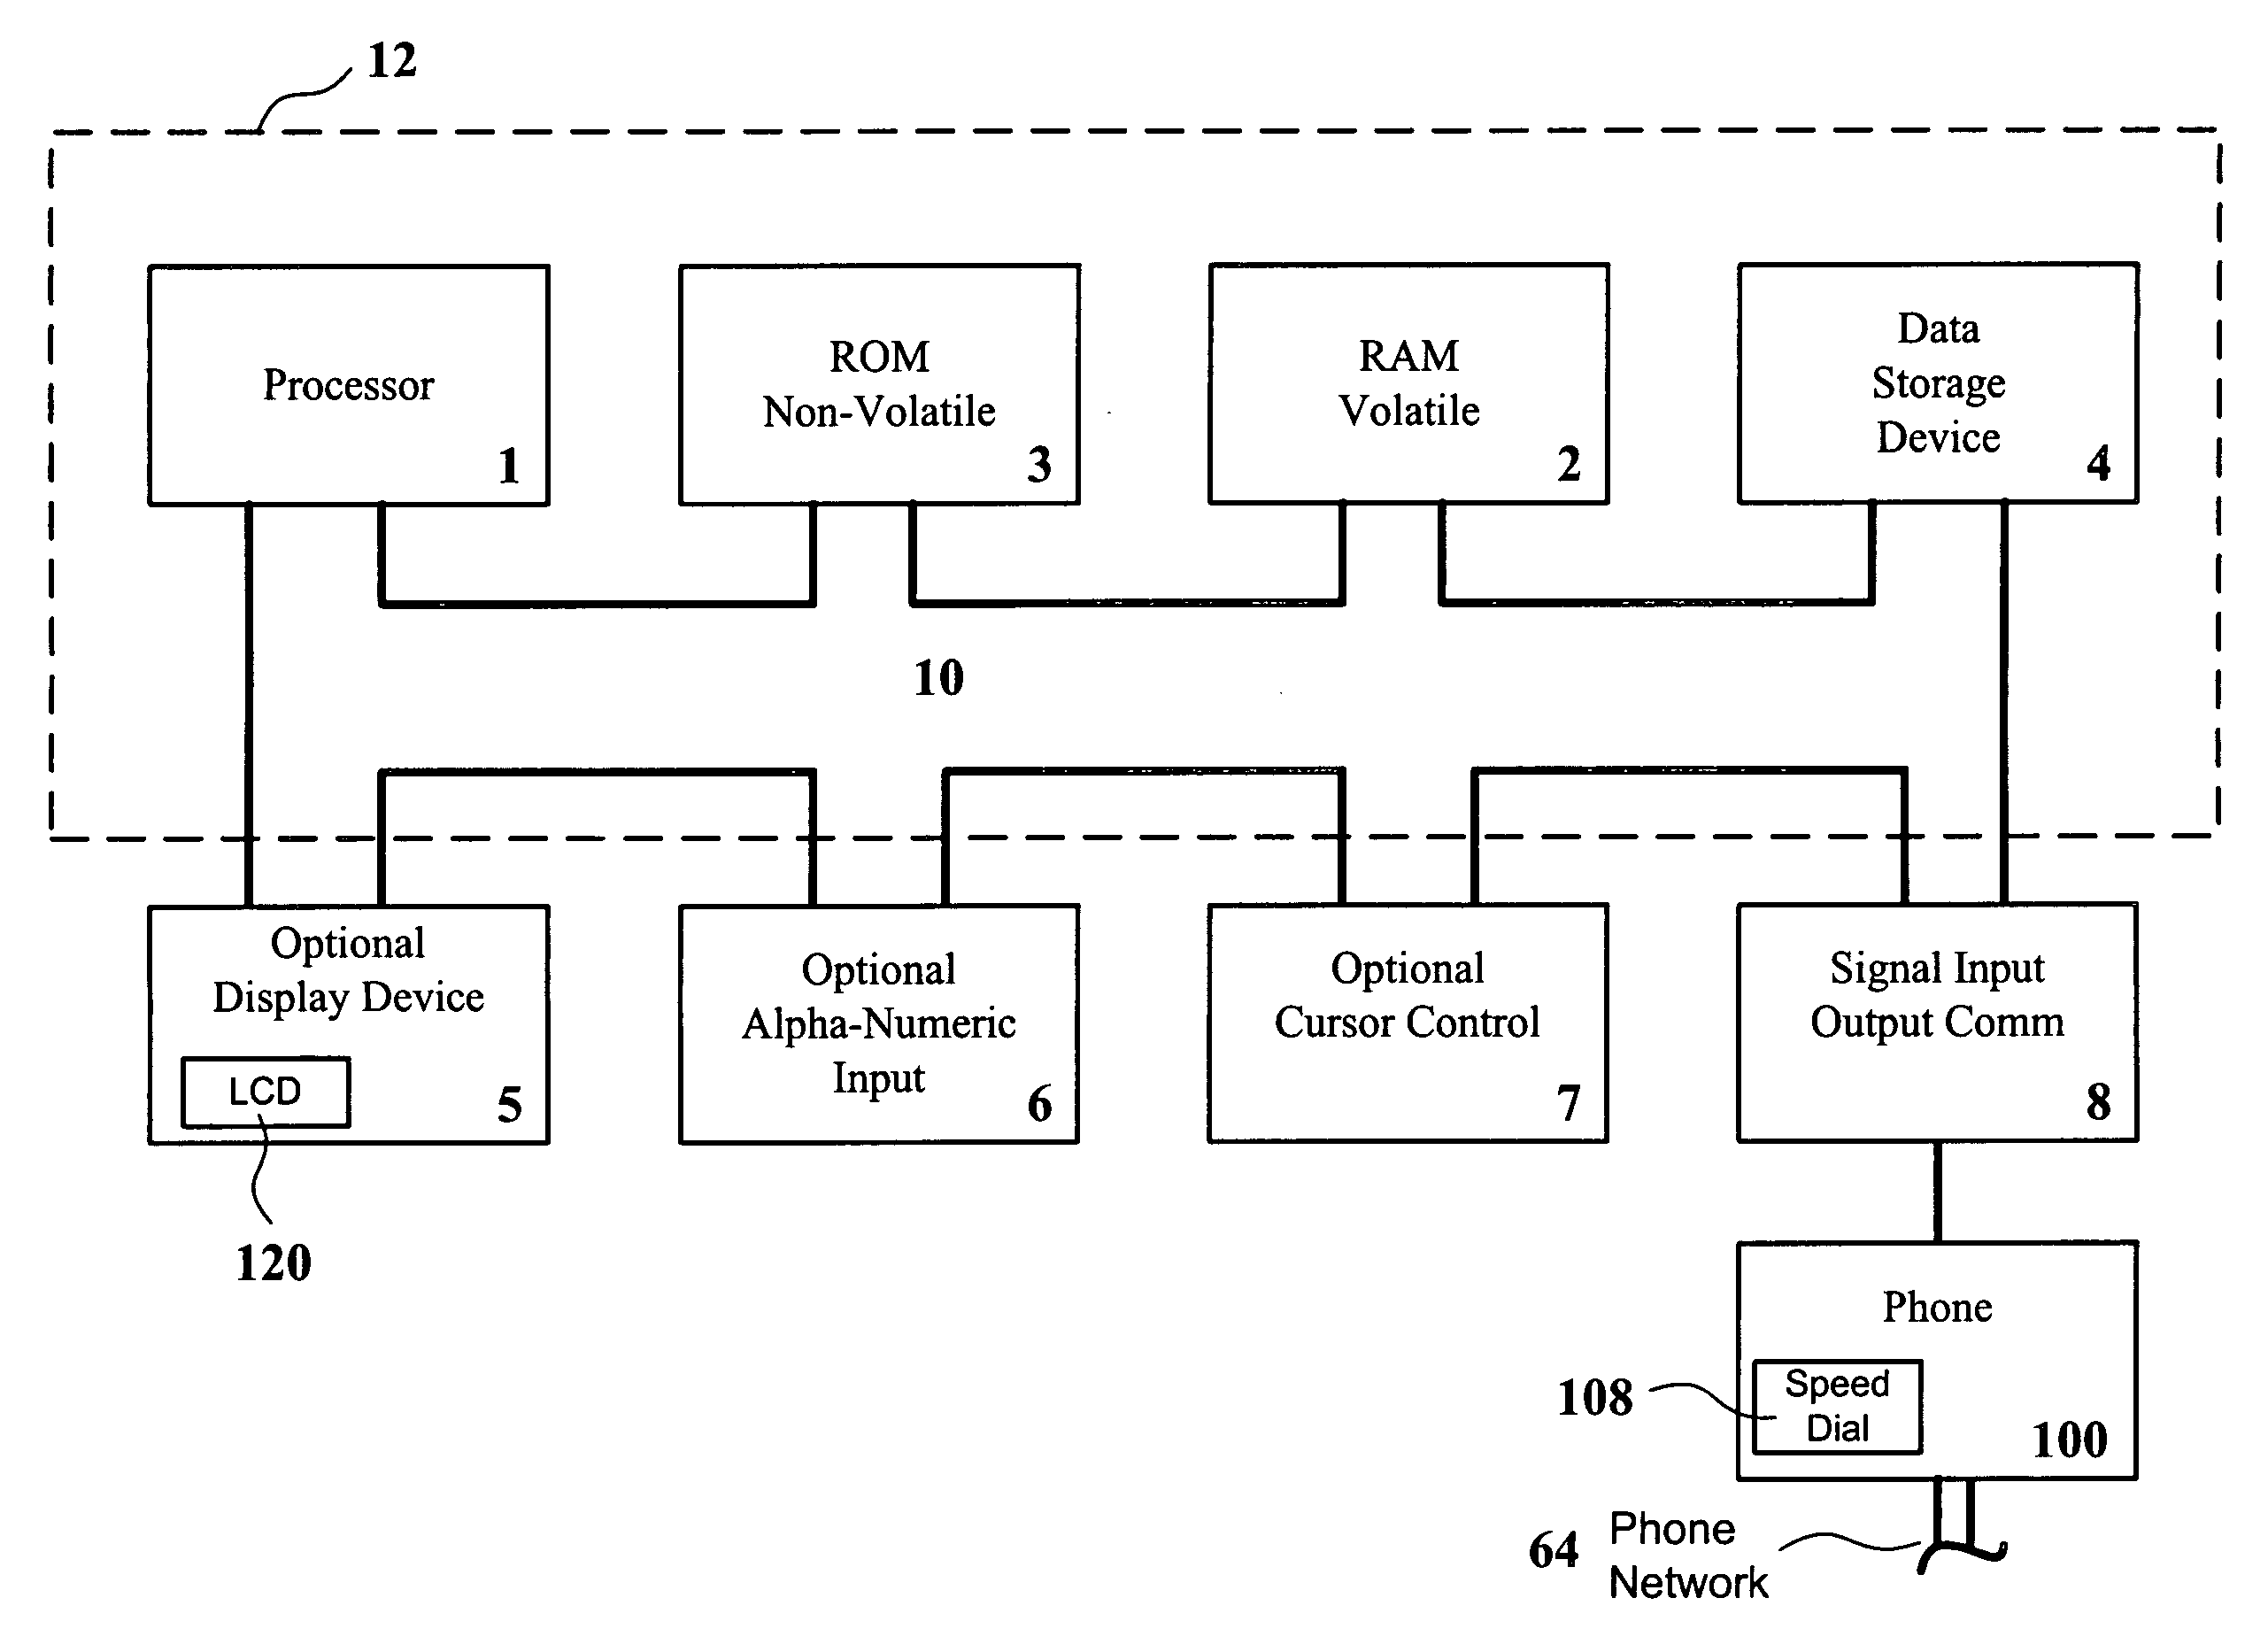 System and method for connecting pending and preset telephone calls to facilitate transitioning to a phone call